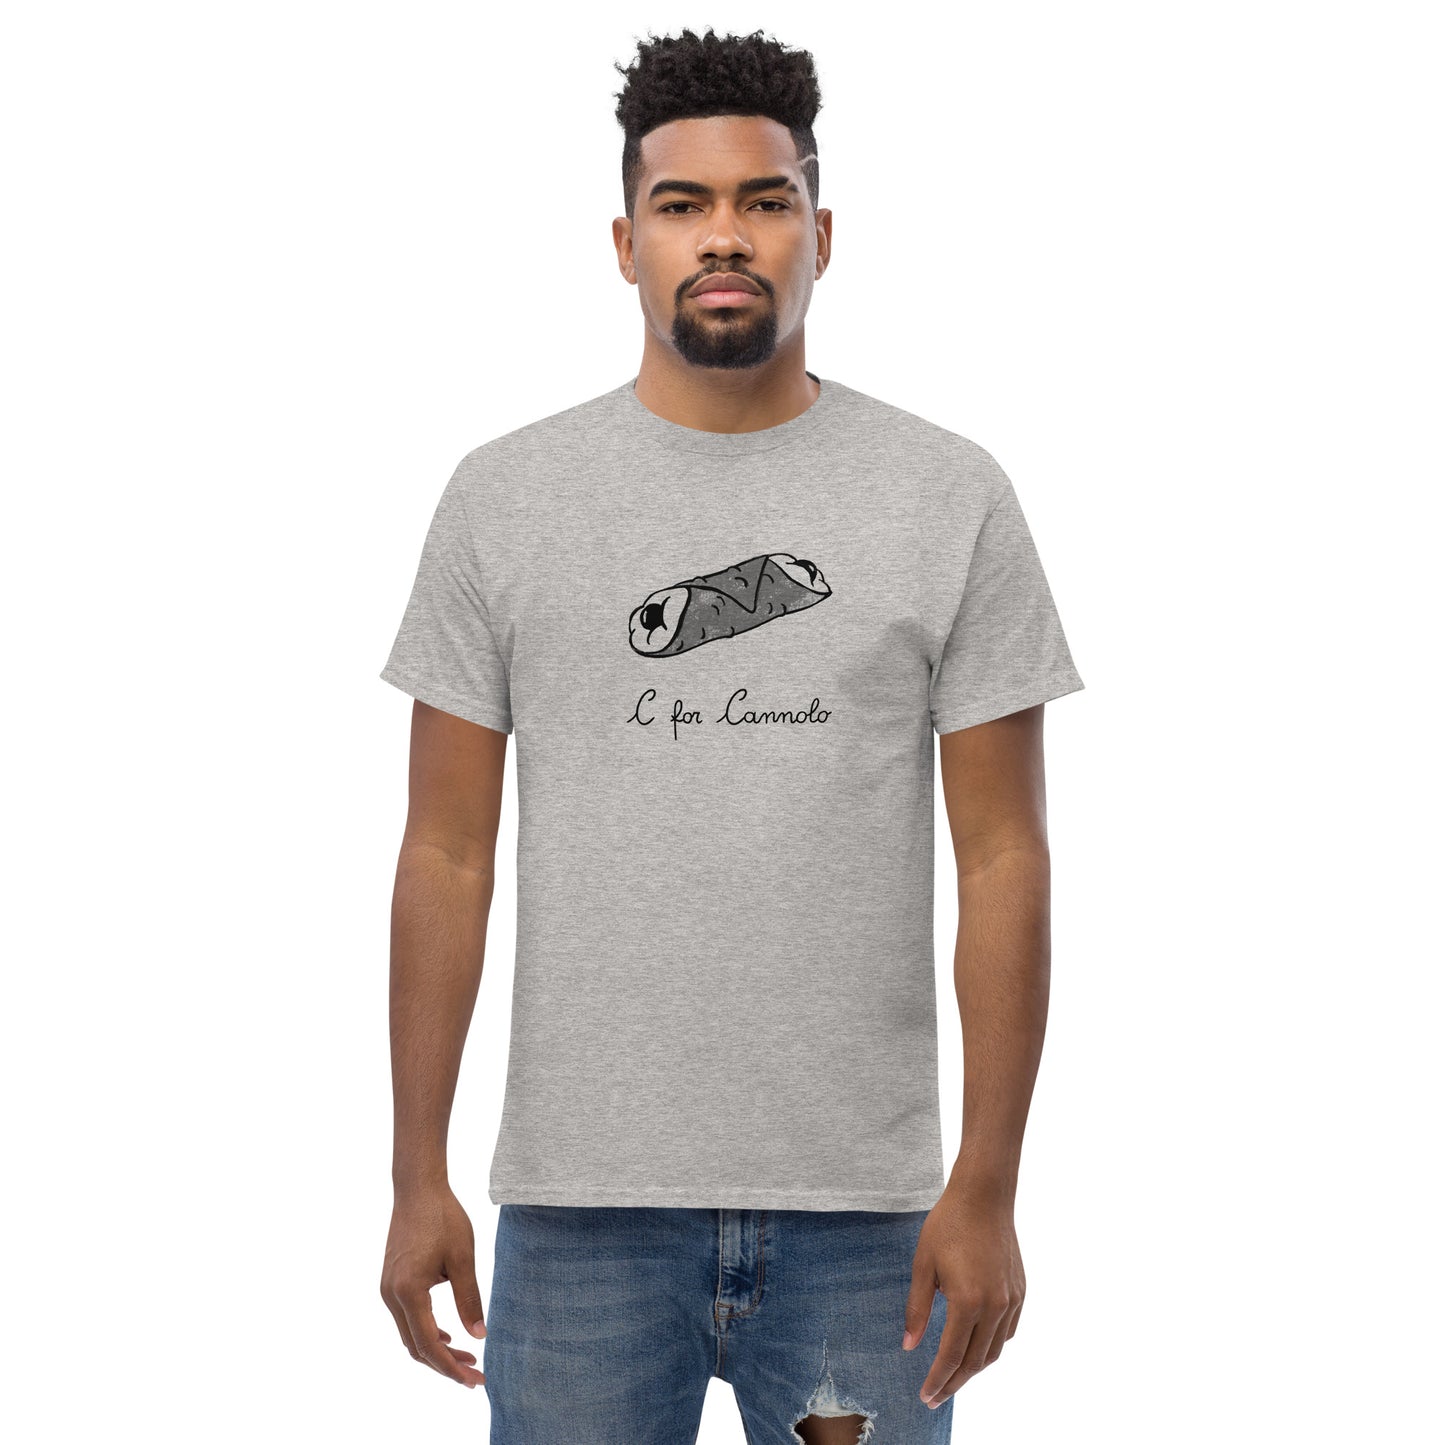 Cannolo on a Men's classic tee